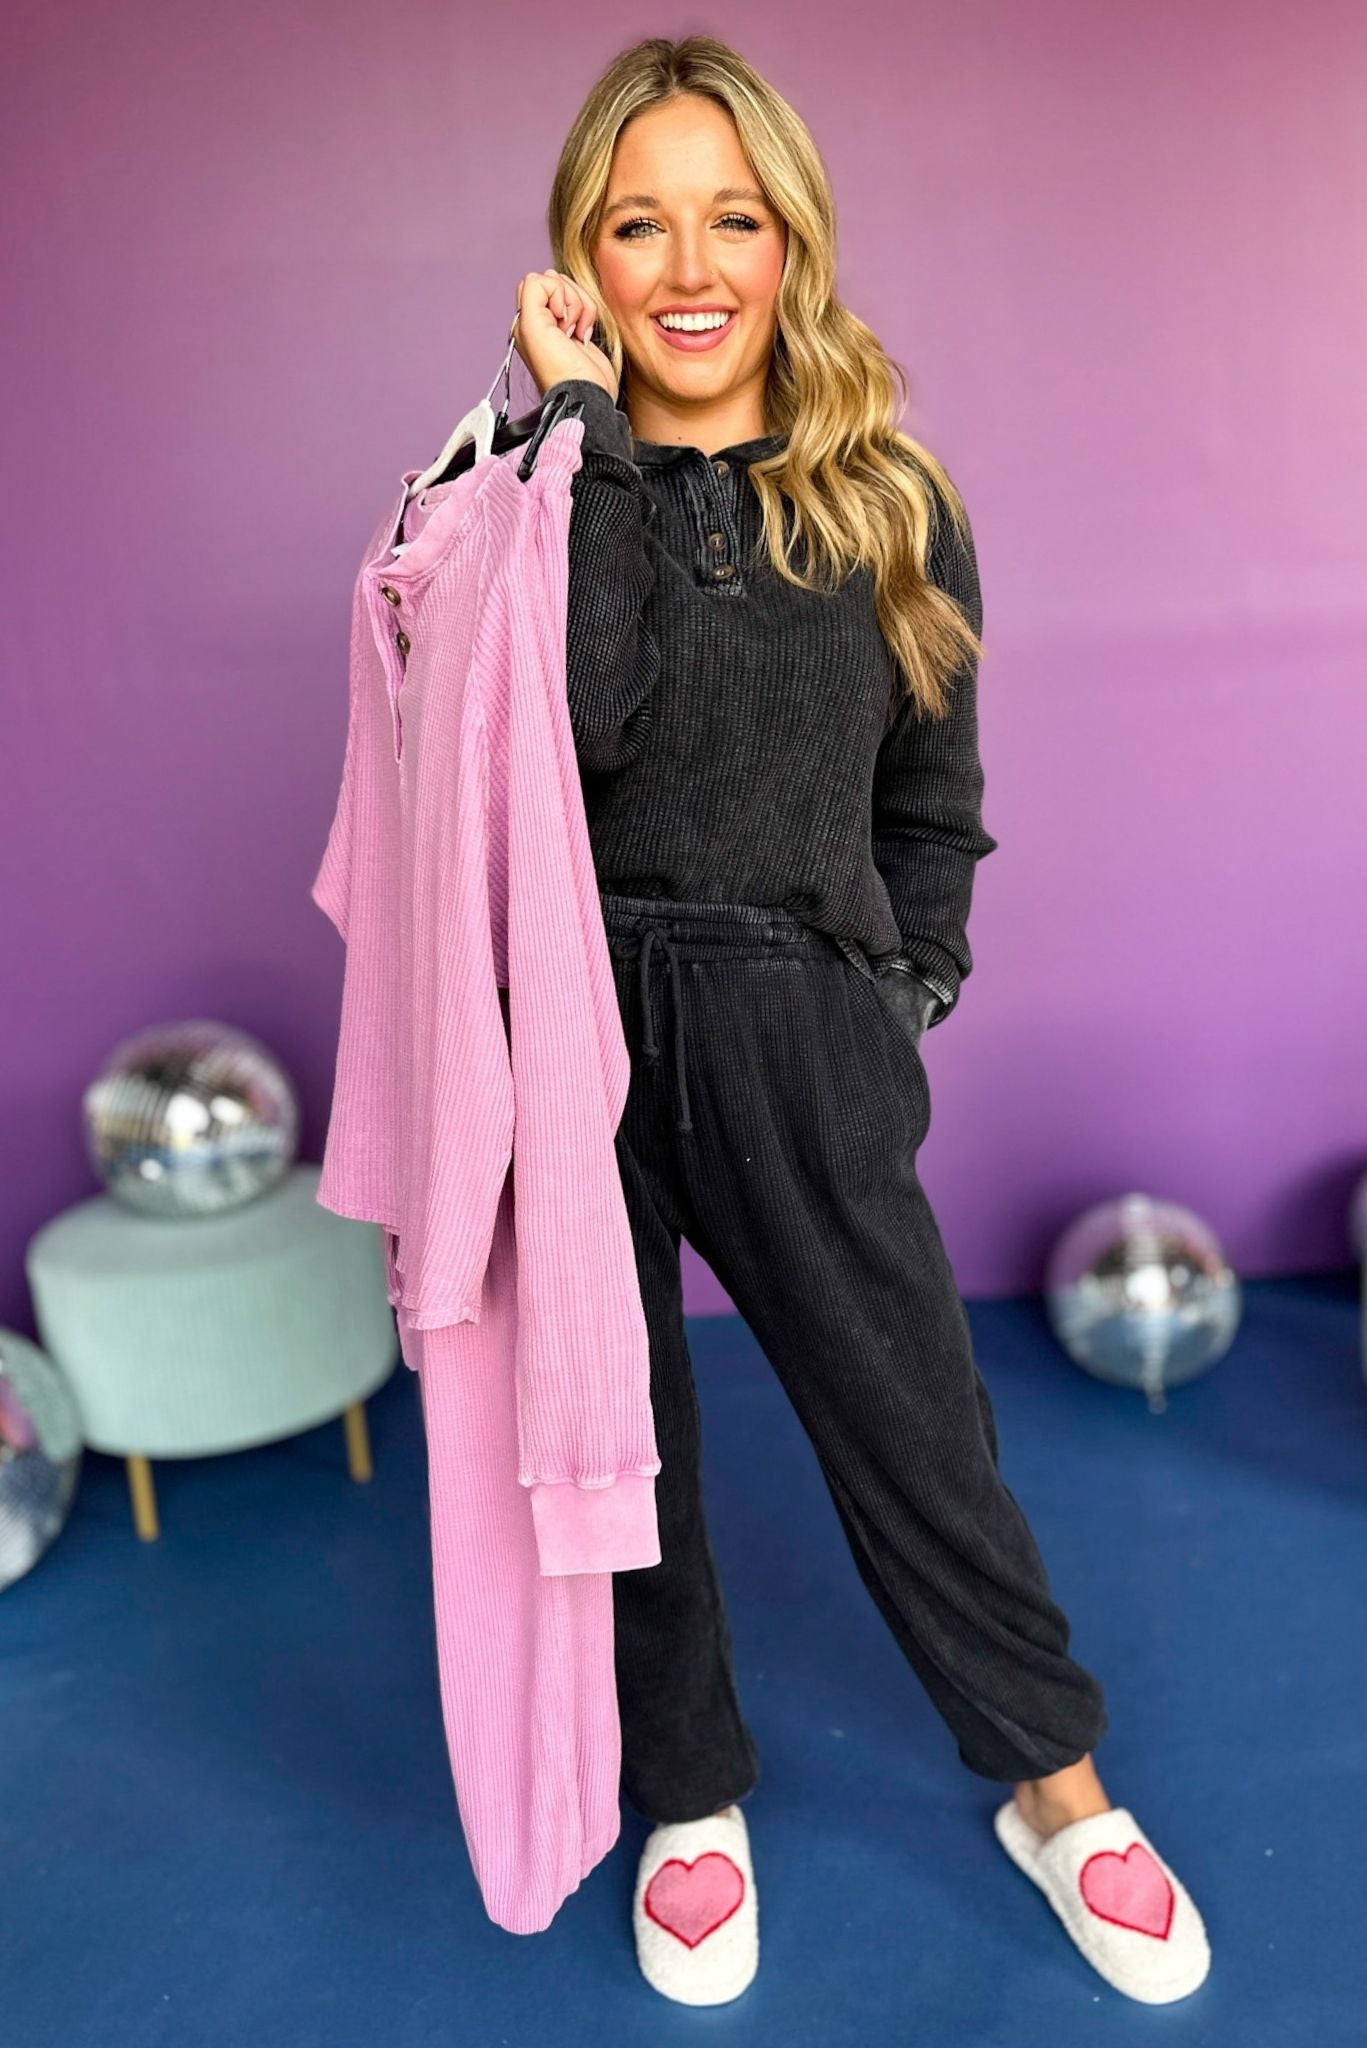 Black Elastic Waistband Ribbed Pants, must have pants, must have style, must have comfortable style, fall fashion, fall style, street style, mom style, elevated comfortable, elevated loungewear, elevated style, shop style your senses by mallory fitzsimmons